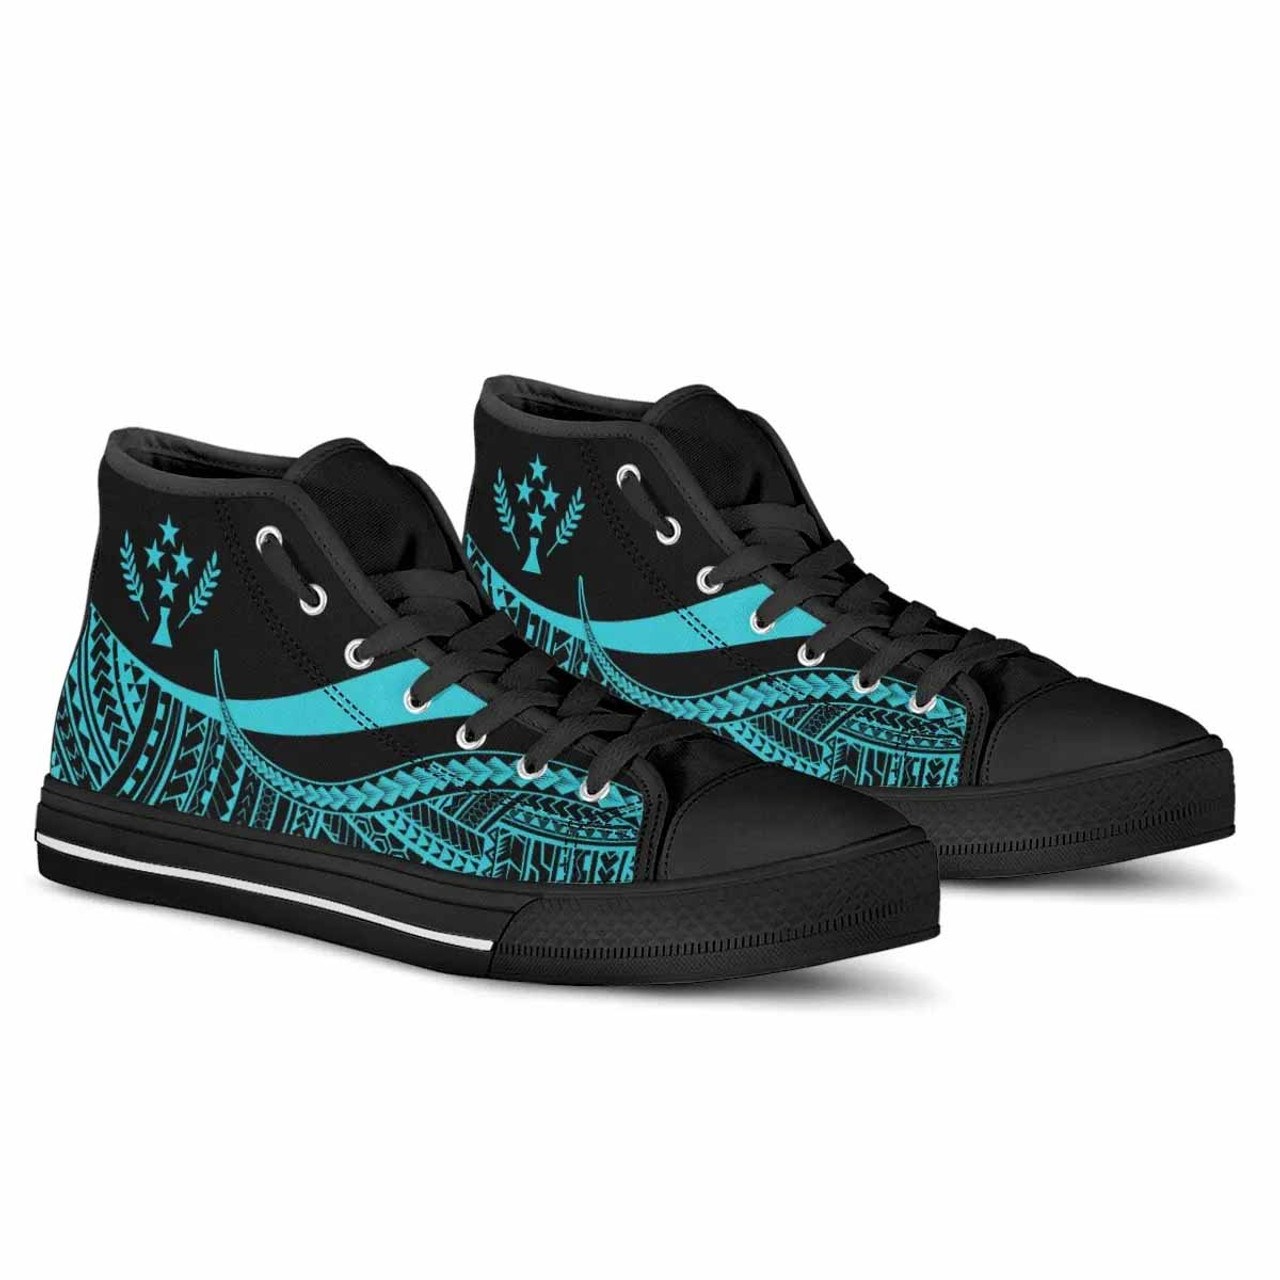 Kosrae High Top Shoes Turquoise - Polynesian Tentacle Tribal Pattern 3